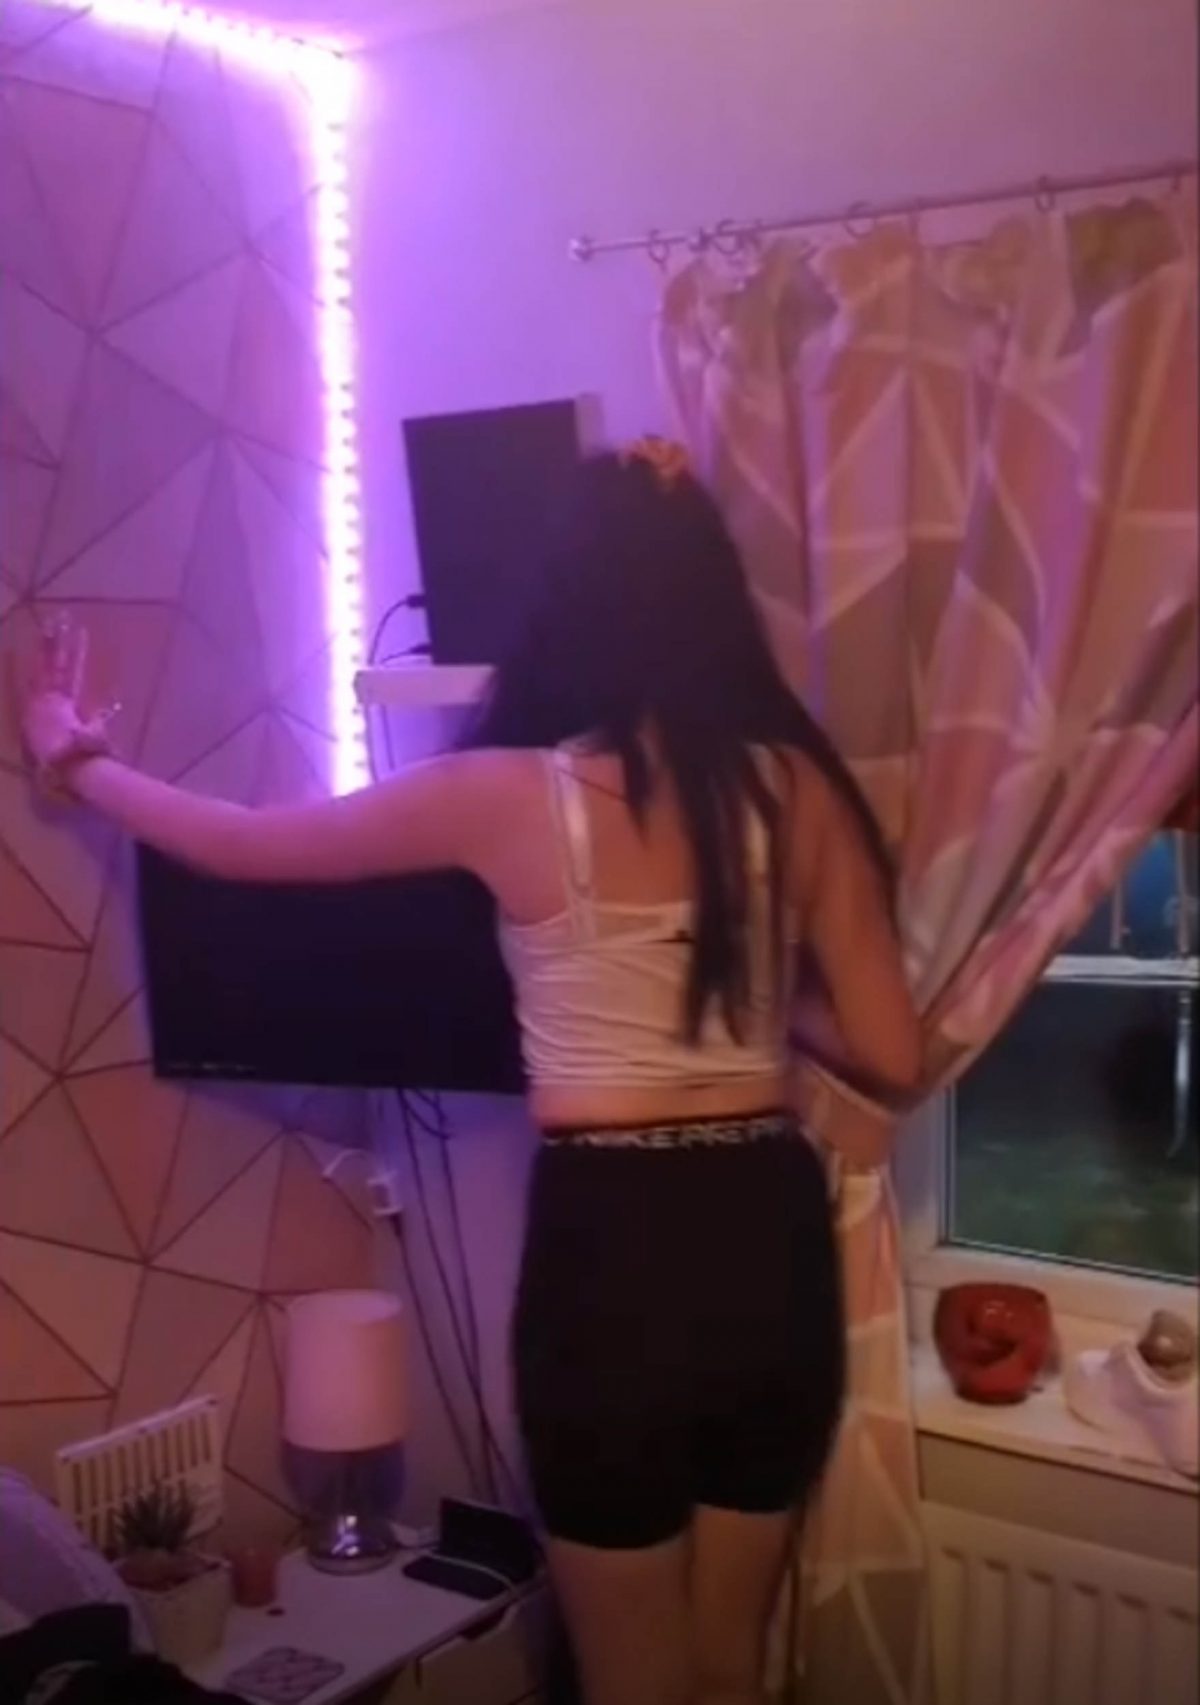 Kacey finding the key under her Xbox